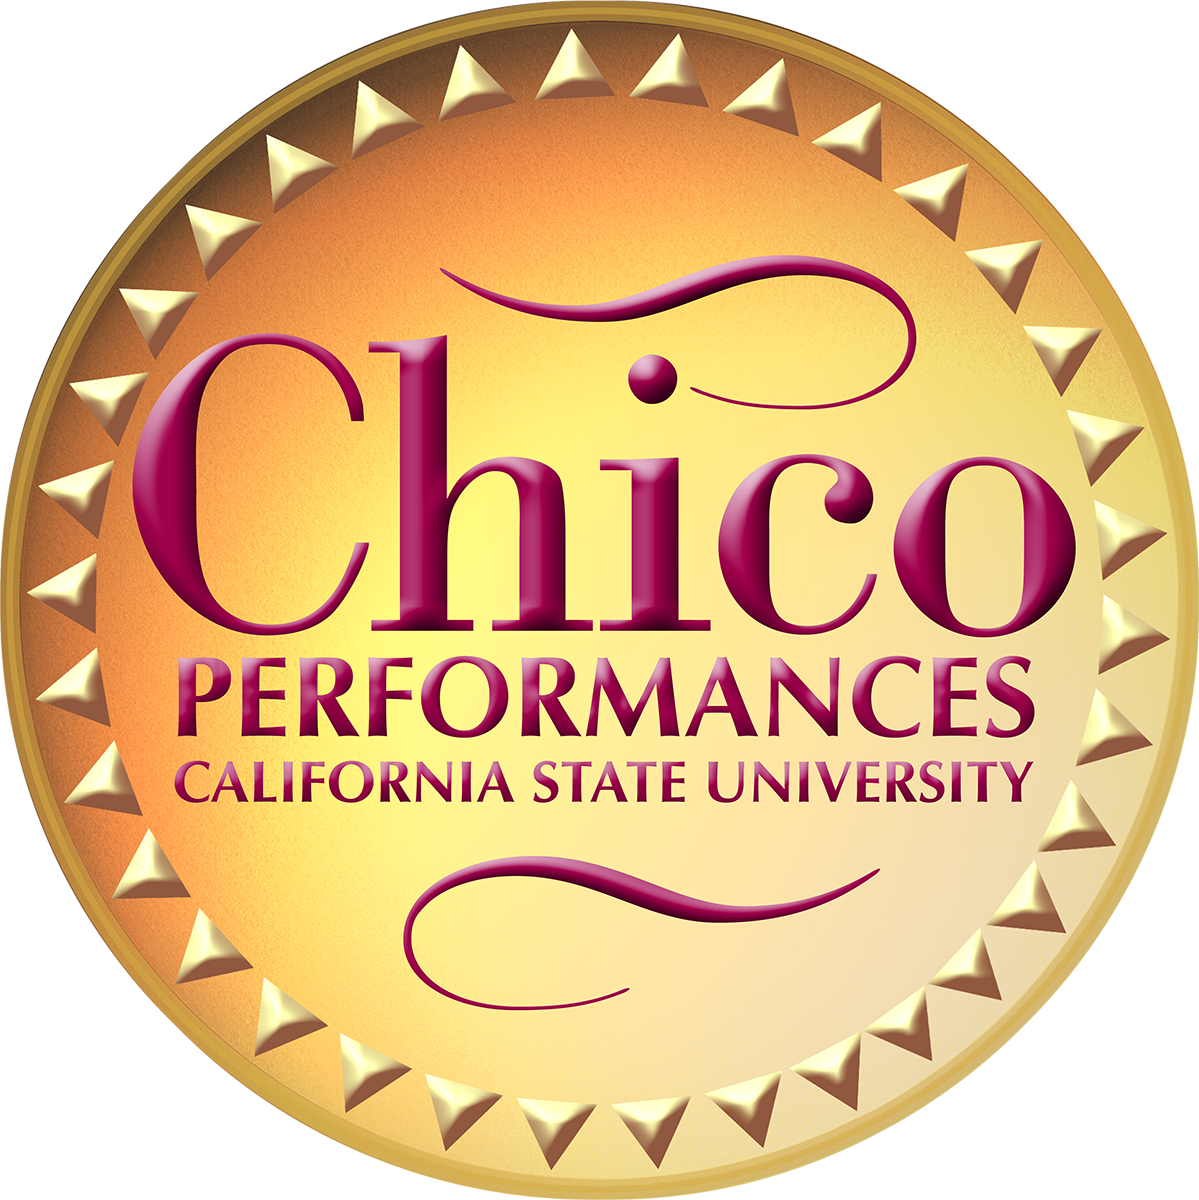 CHico Perf Logo.png